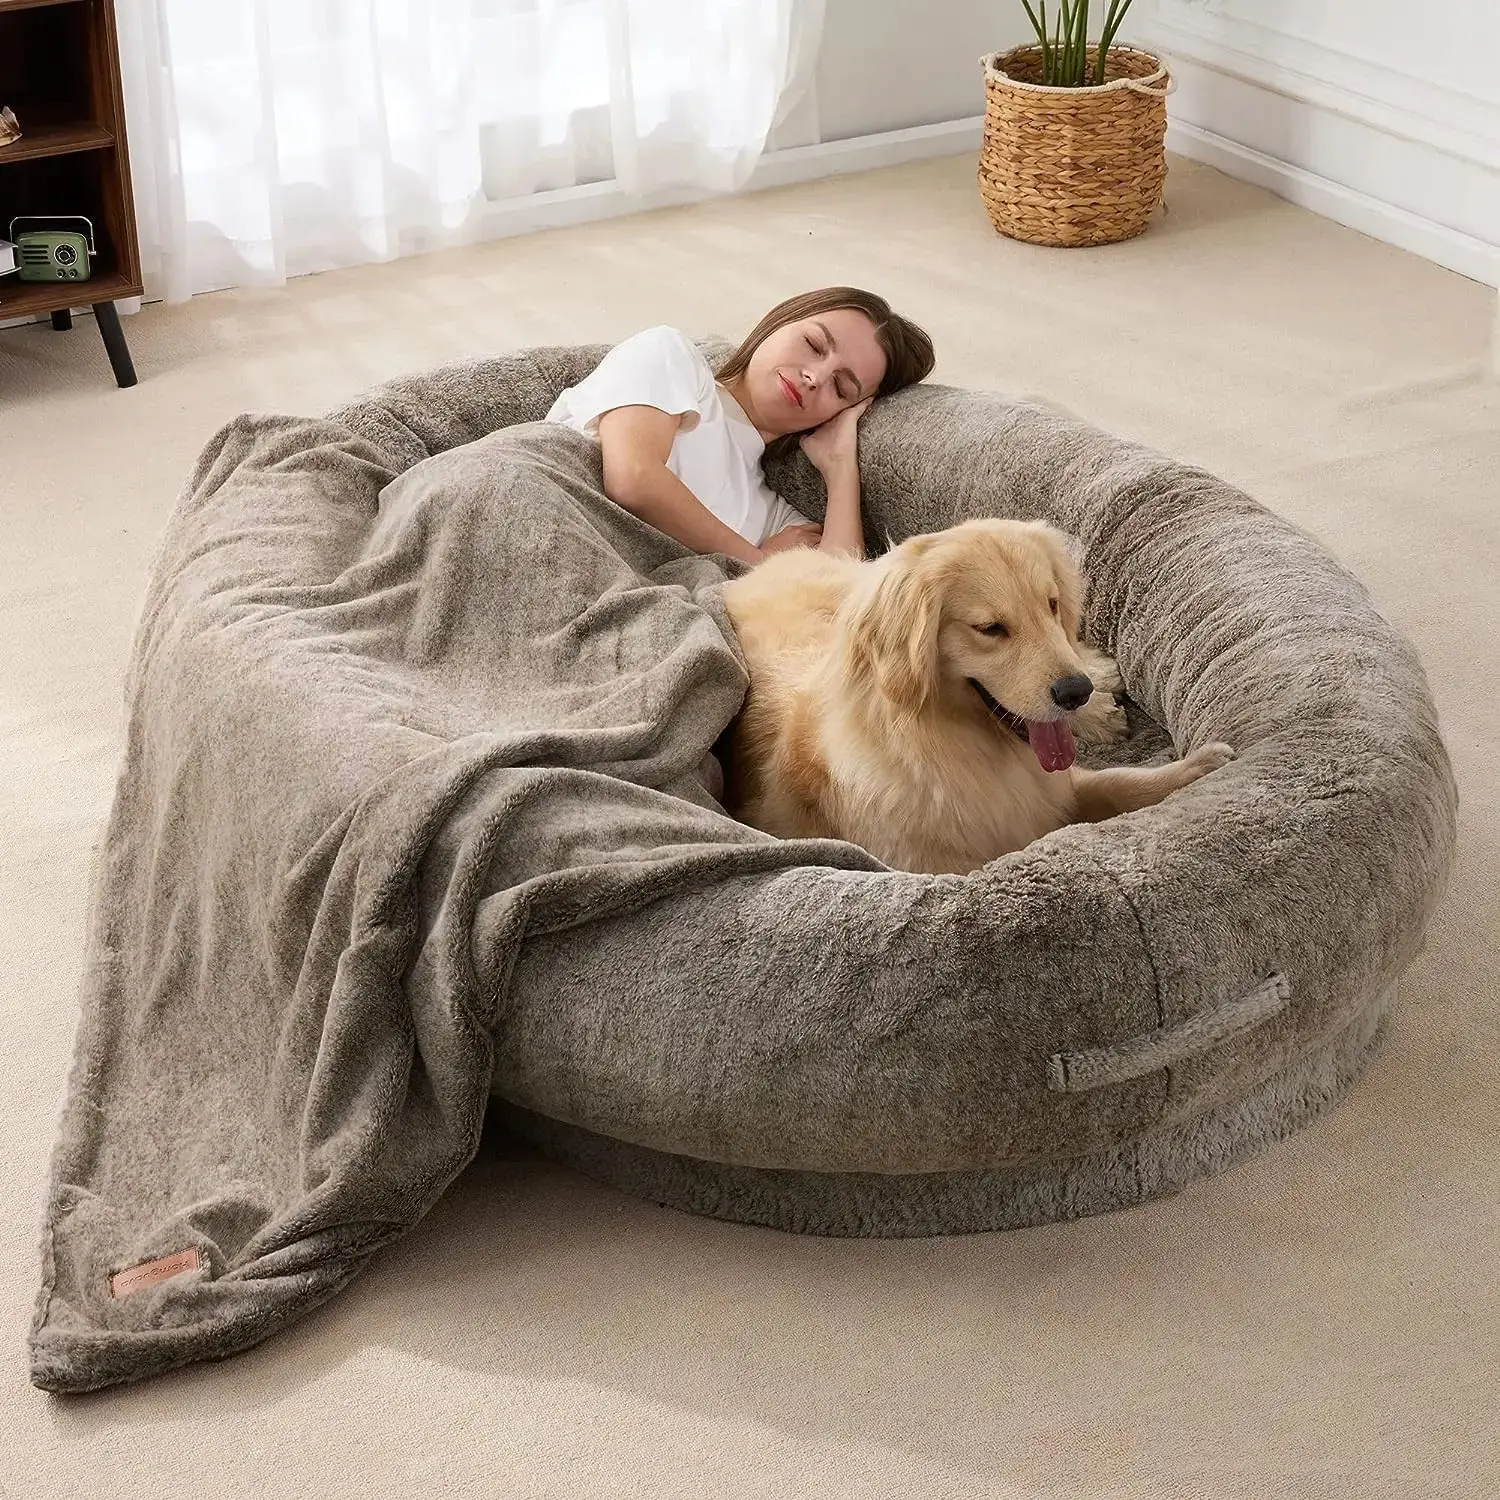 Adult Sized Human Dog Bed Fluffy Pet Bed Long Plush Luxury Designer Dog Pet Mat Sofa Human Sized Dog Bed For People Adults